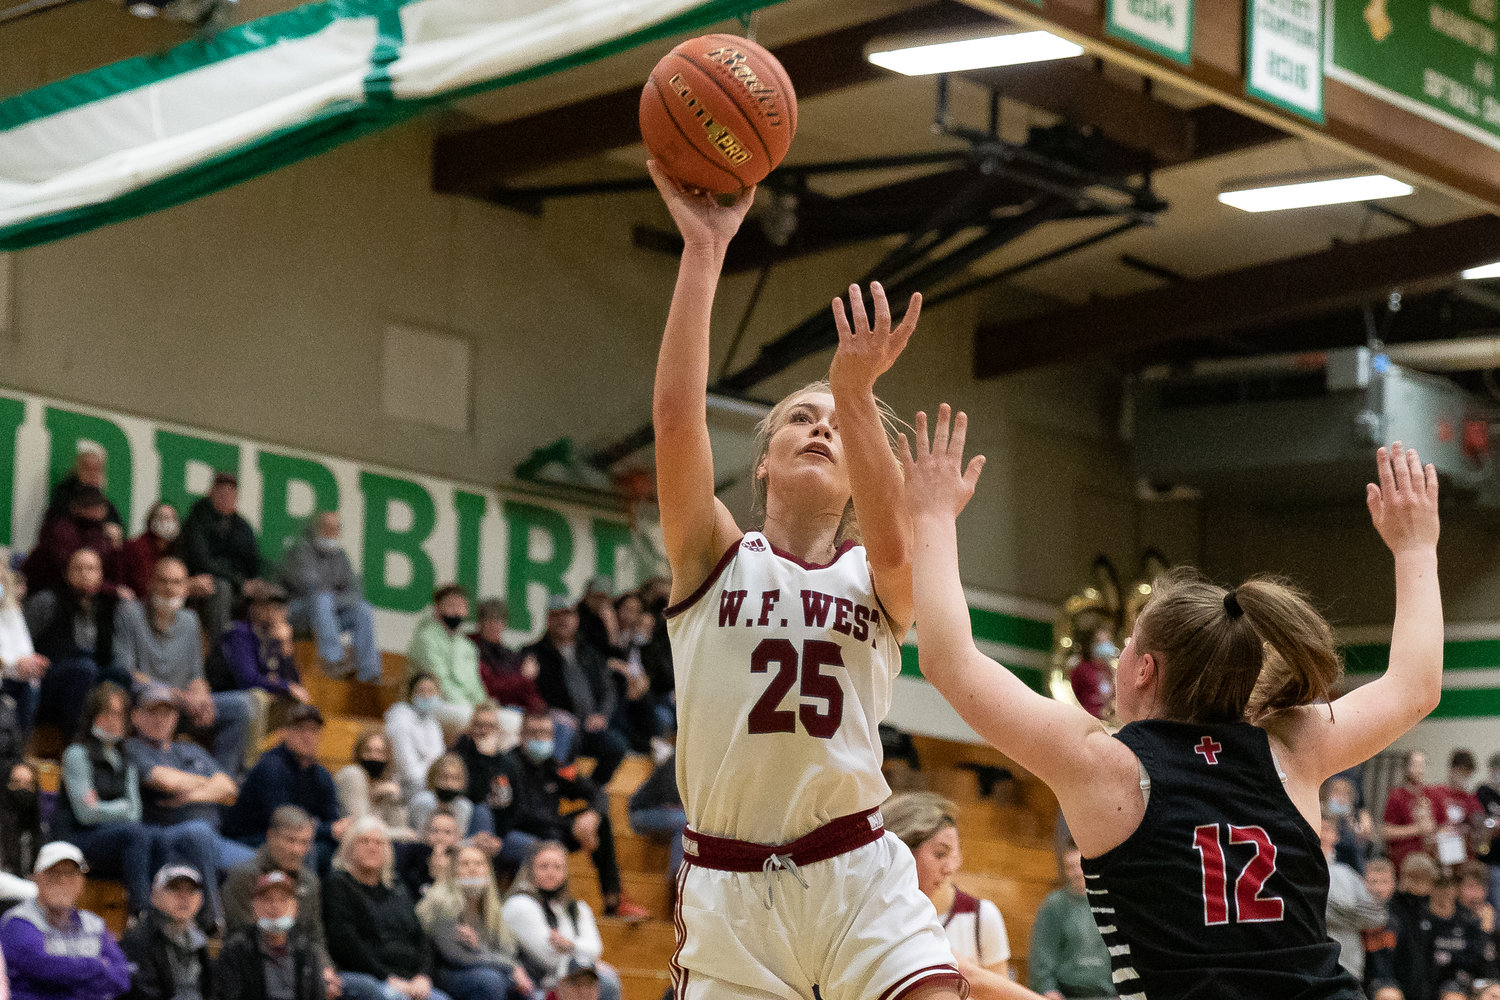 W.F. West guard Kyla McCallum attempts a shot against Archbishop Murphy in the regional round of the state tournament at Tumwater Feb. 25.